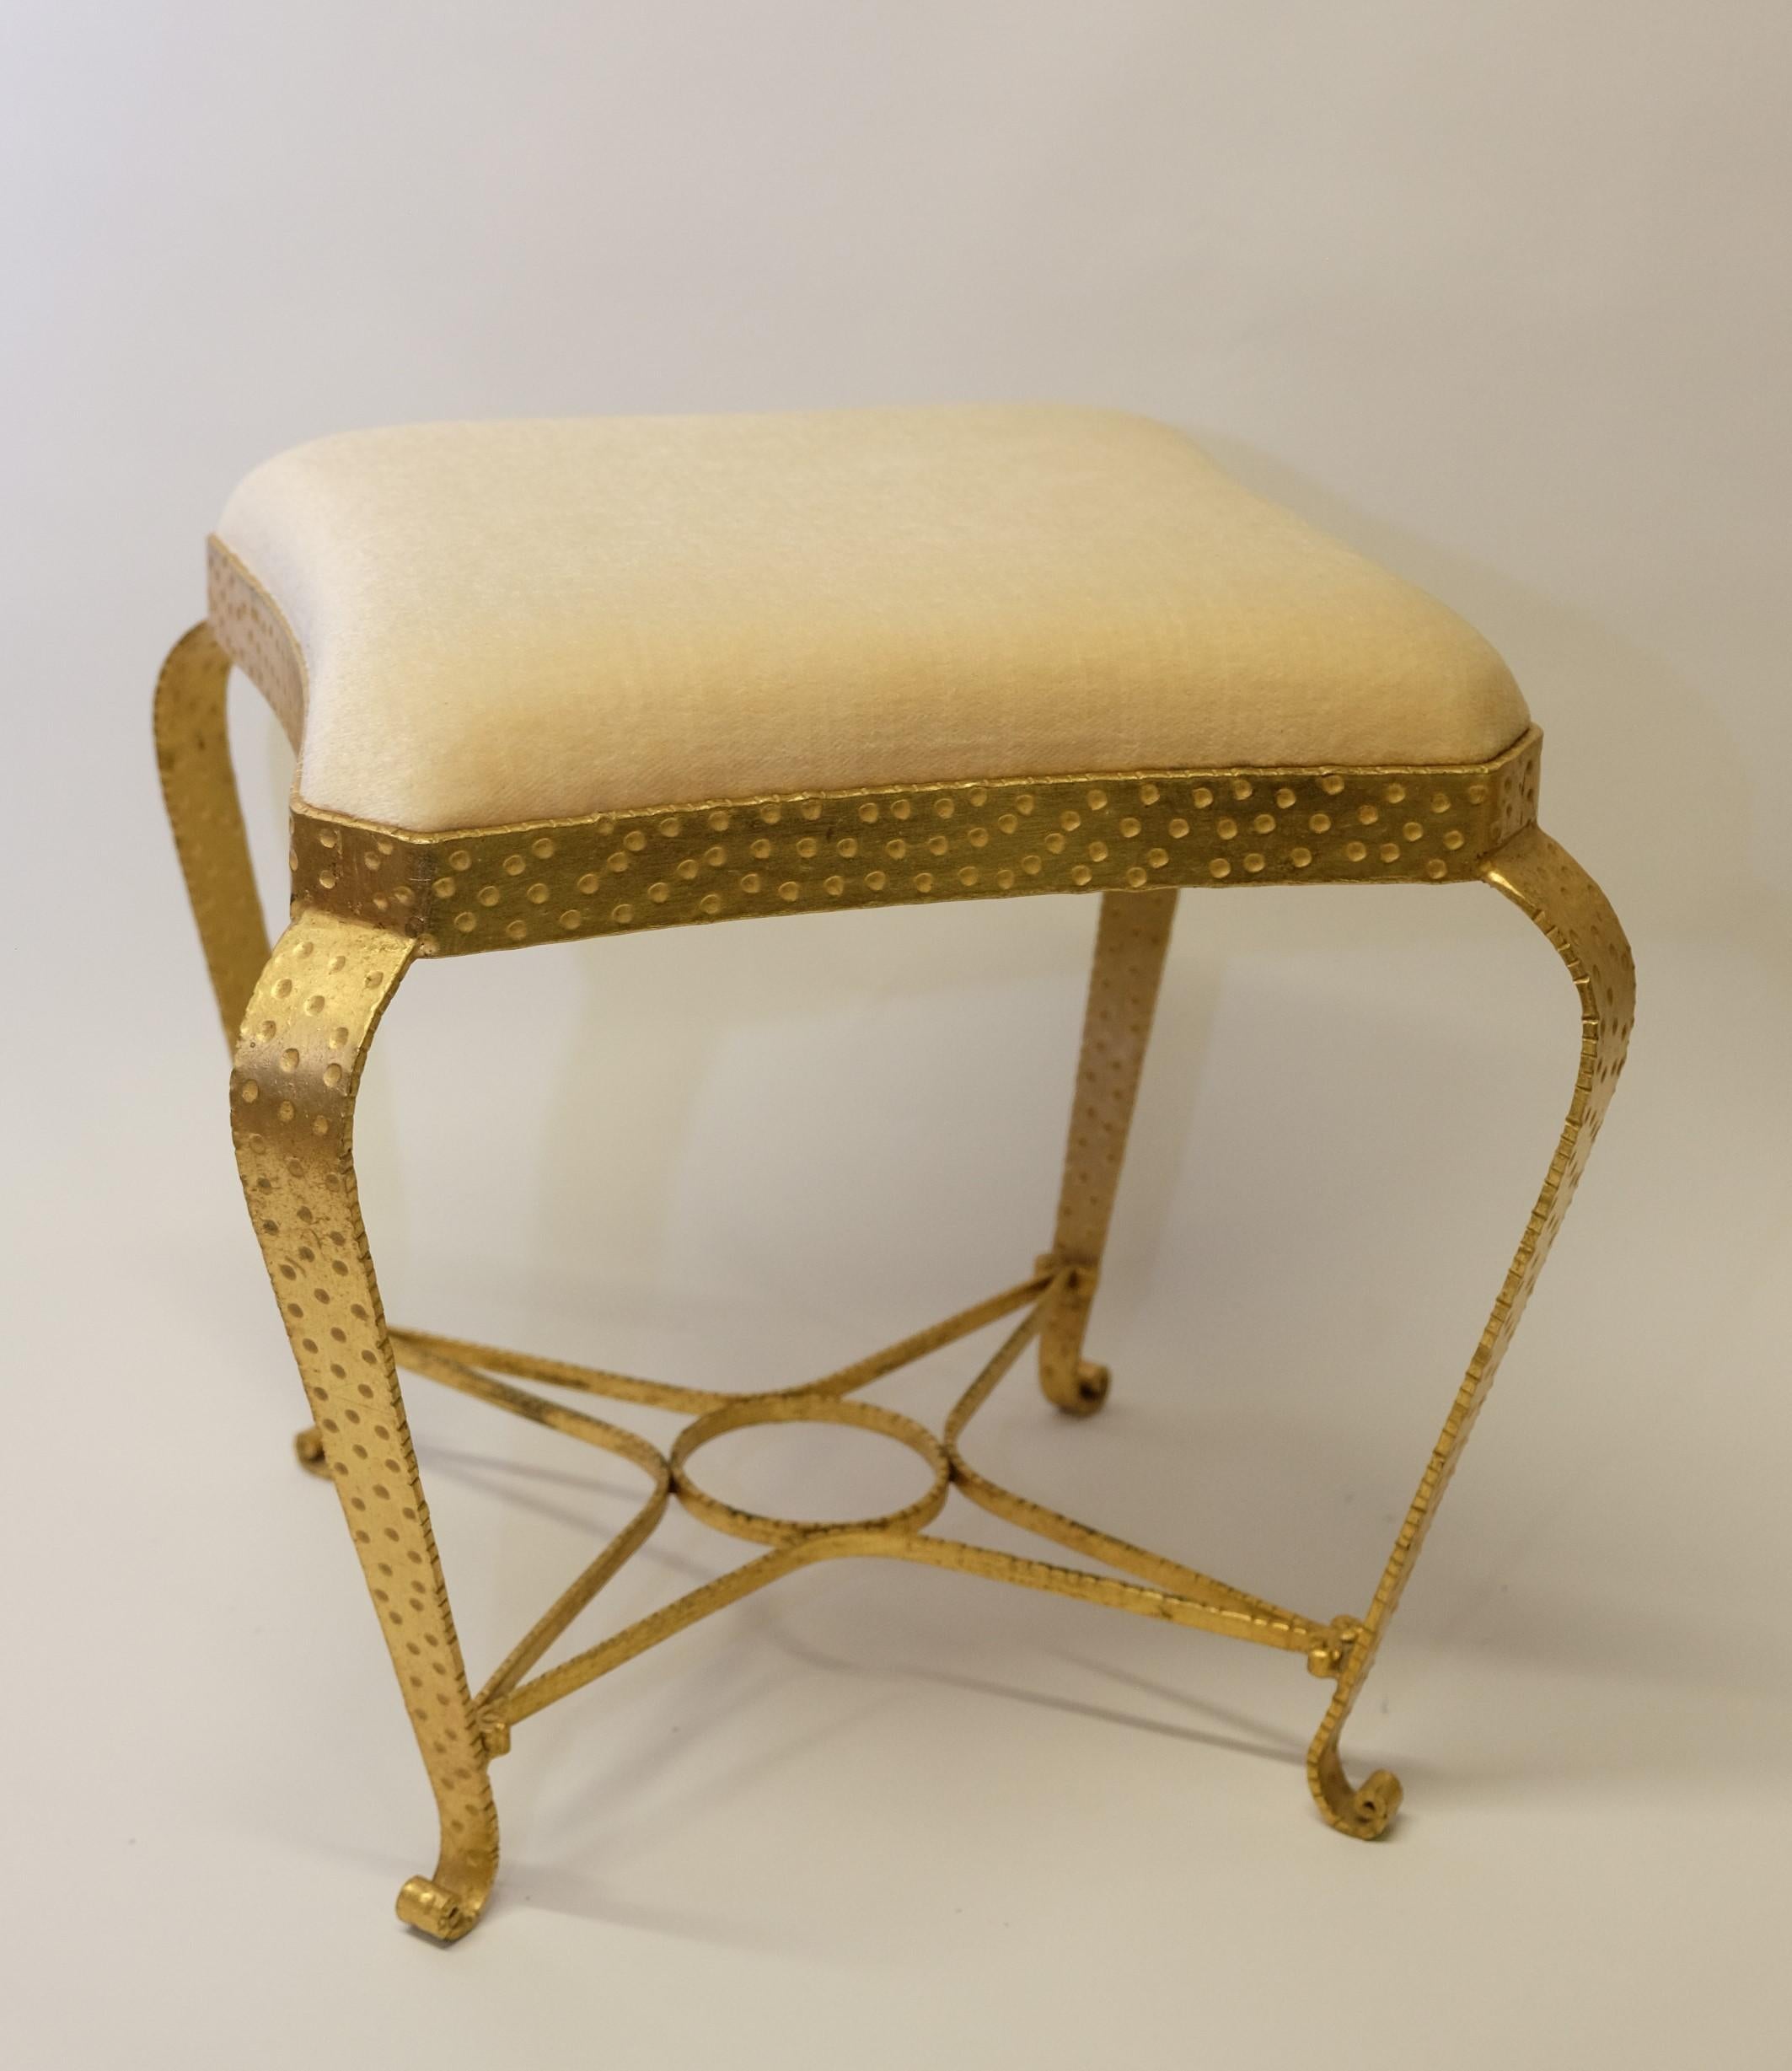 Mid-Century Modern Stool in Gilt Metal by Pier Luigi Colli, Italy 1950s For Sale